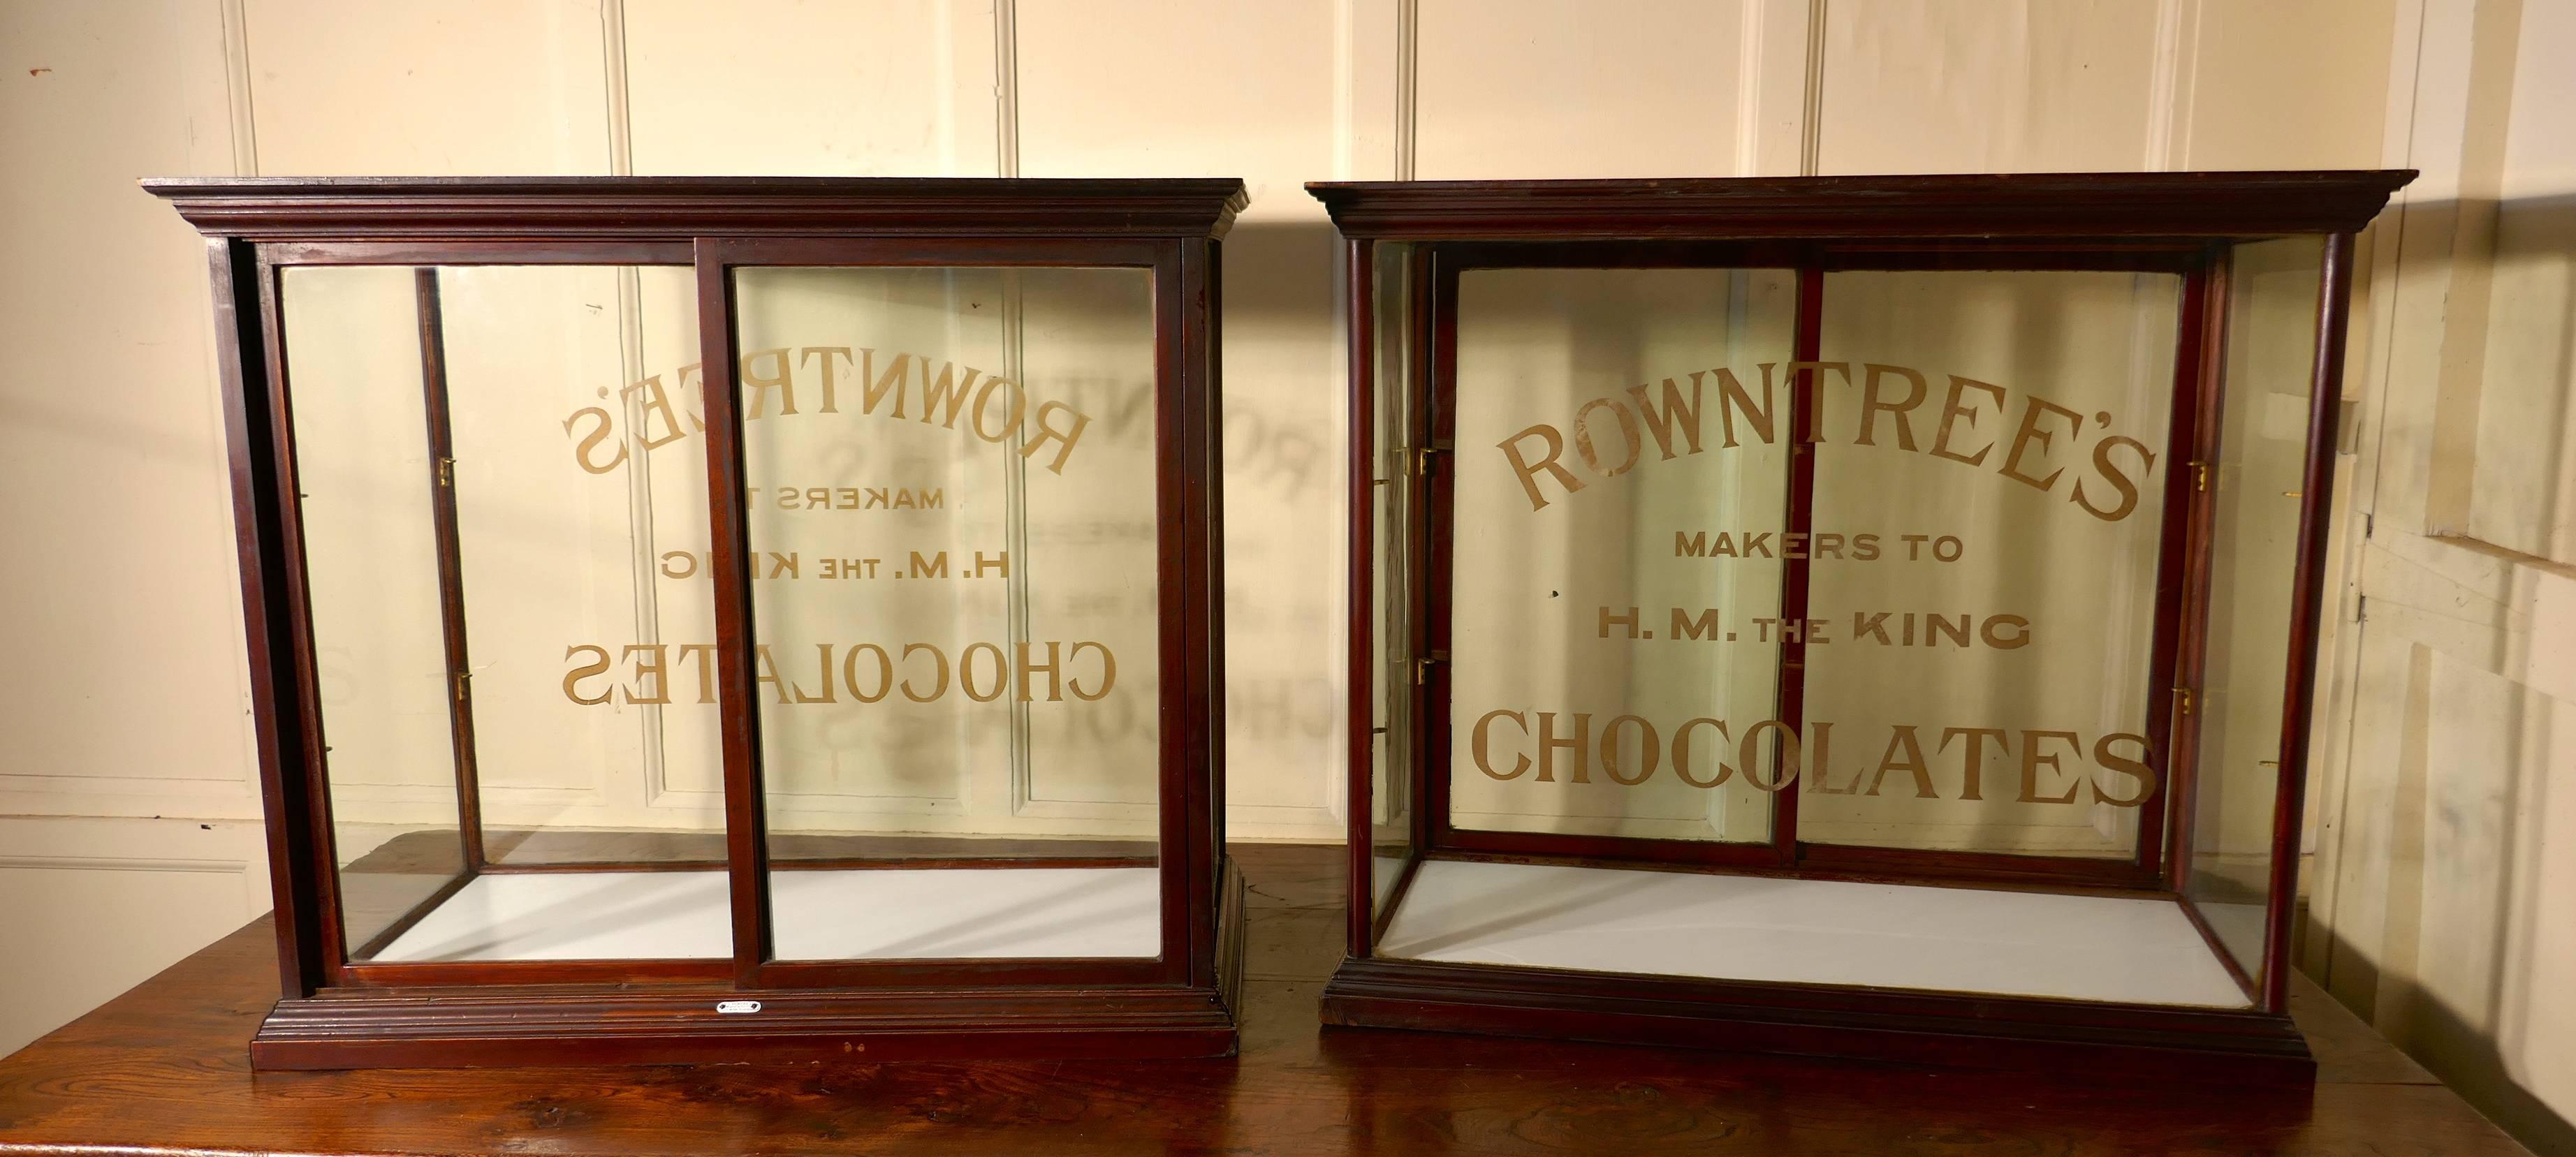 Pair Sweet Shop Display Cabinets, Rowntree’s Chocolates In Good Condition For Sale In Chillerton, Isle of Wight